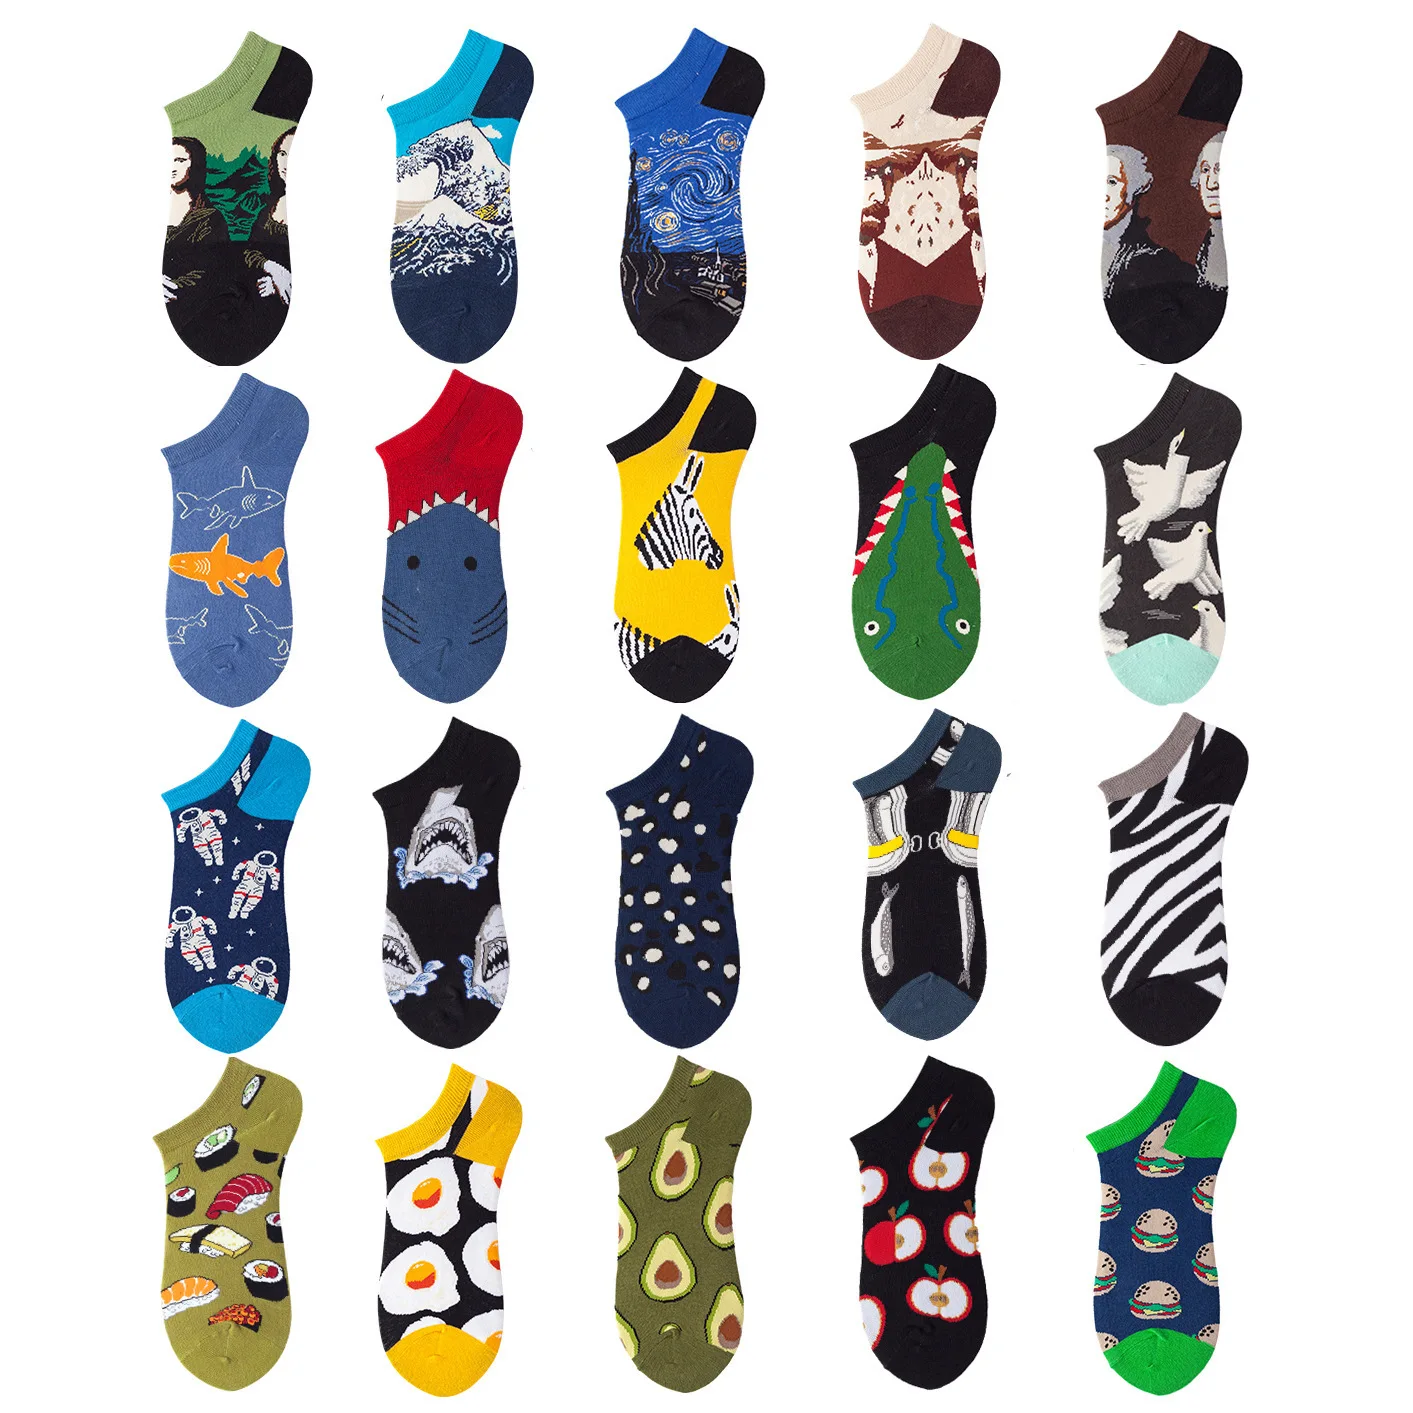 40 Style Fashion Colorful Short Socks Men Cotton Novelty Oil Painting Animals Food Avocado Casual Funny Ankle Sox